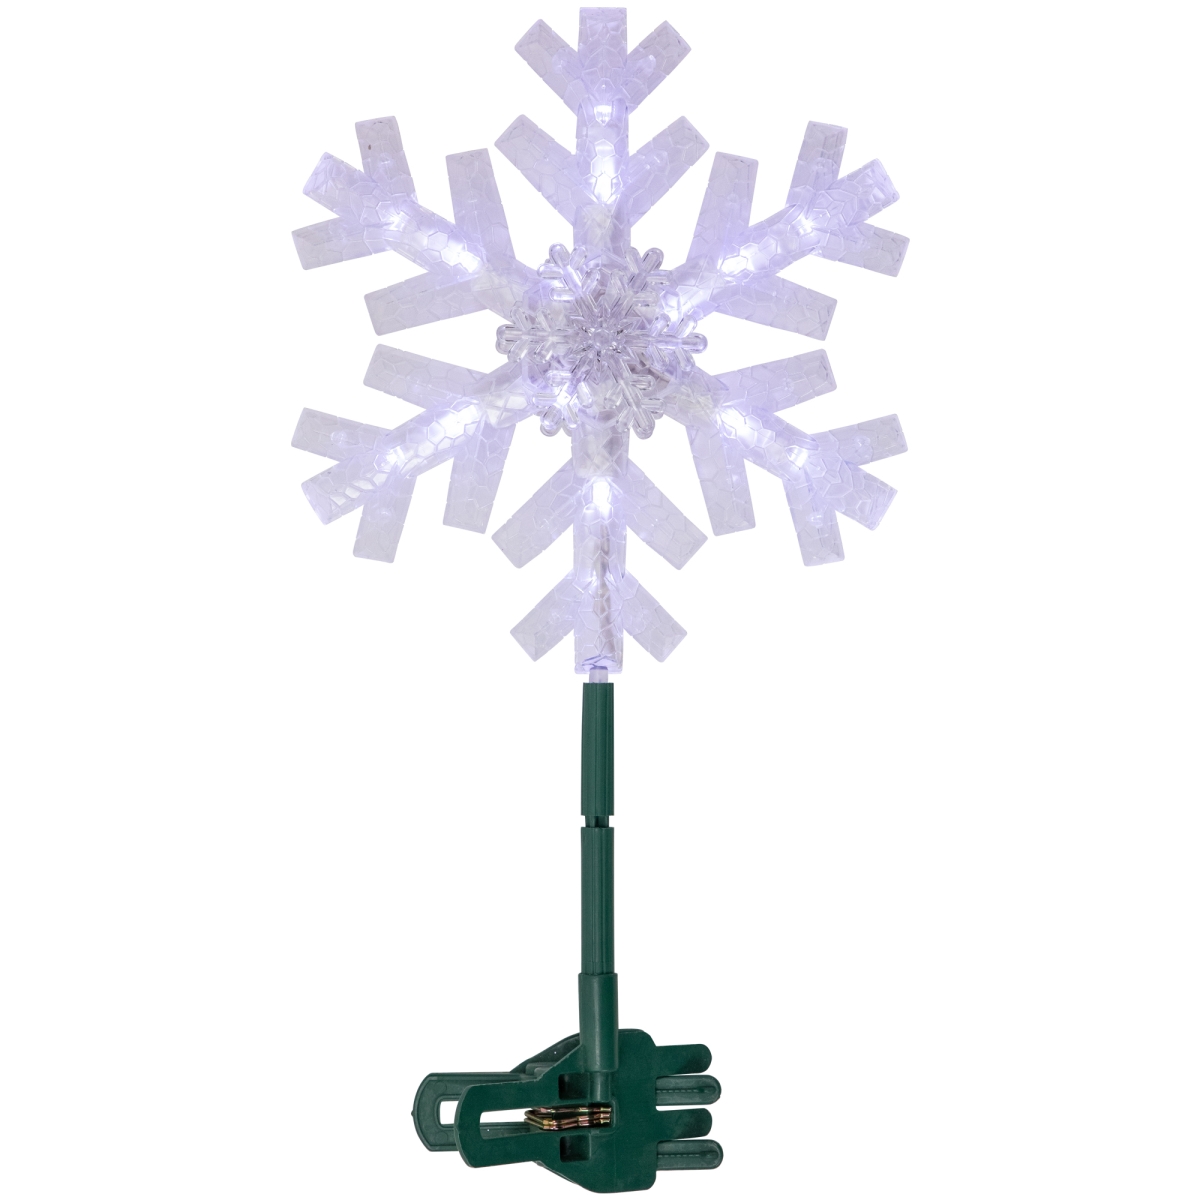 Picture of Northlight 35680533 14.75 in. Lighted LED Clip on Snowflake Christmas Tree Topper - White Lights